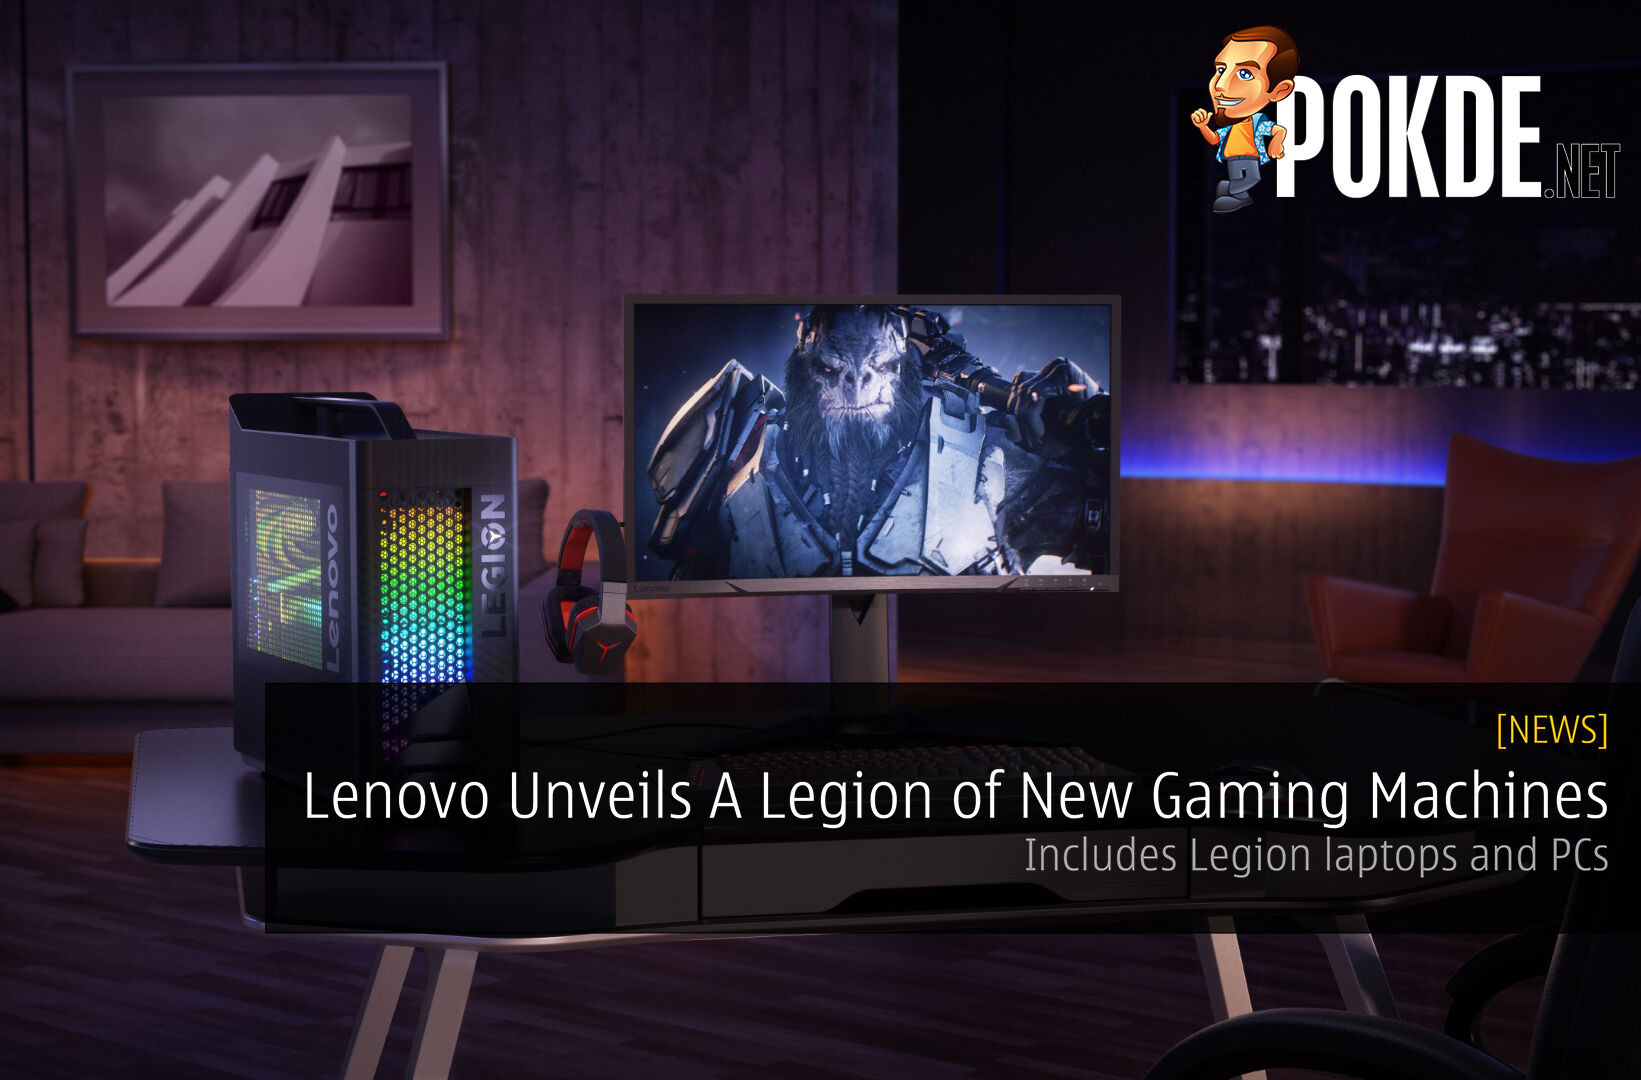 Lenovo Unveils A Legion of New Gaming Machines - Includes Legion laptops and PCs 21